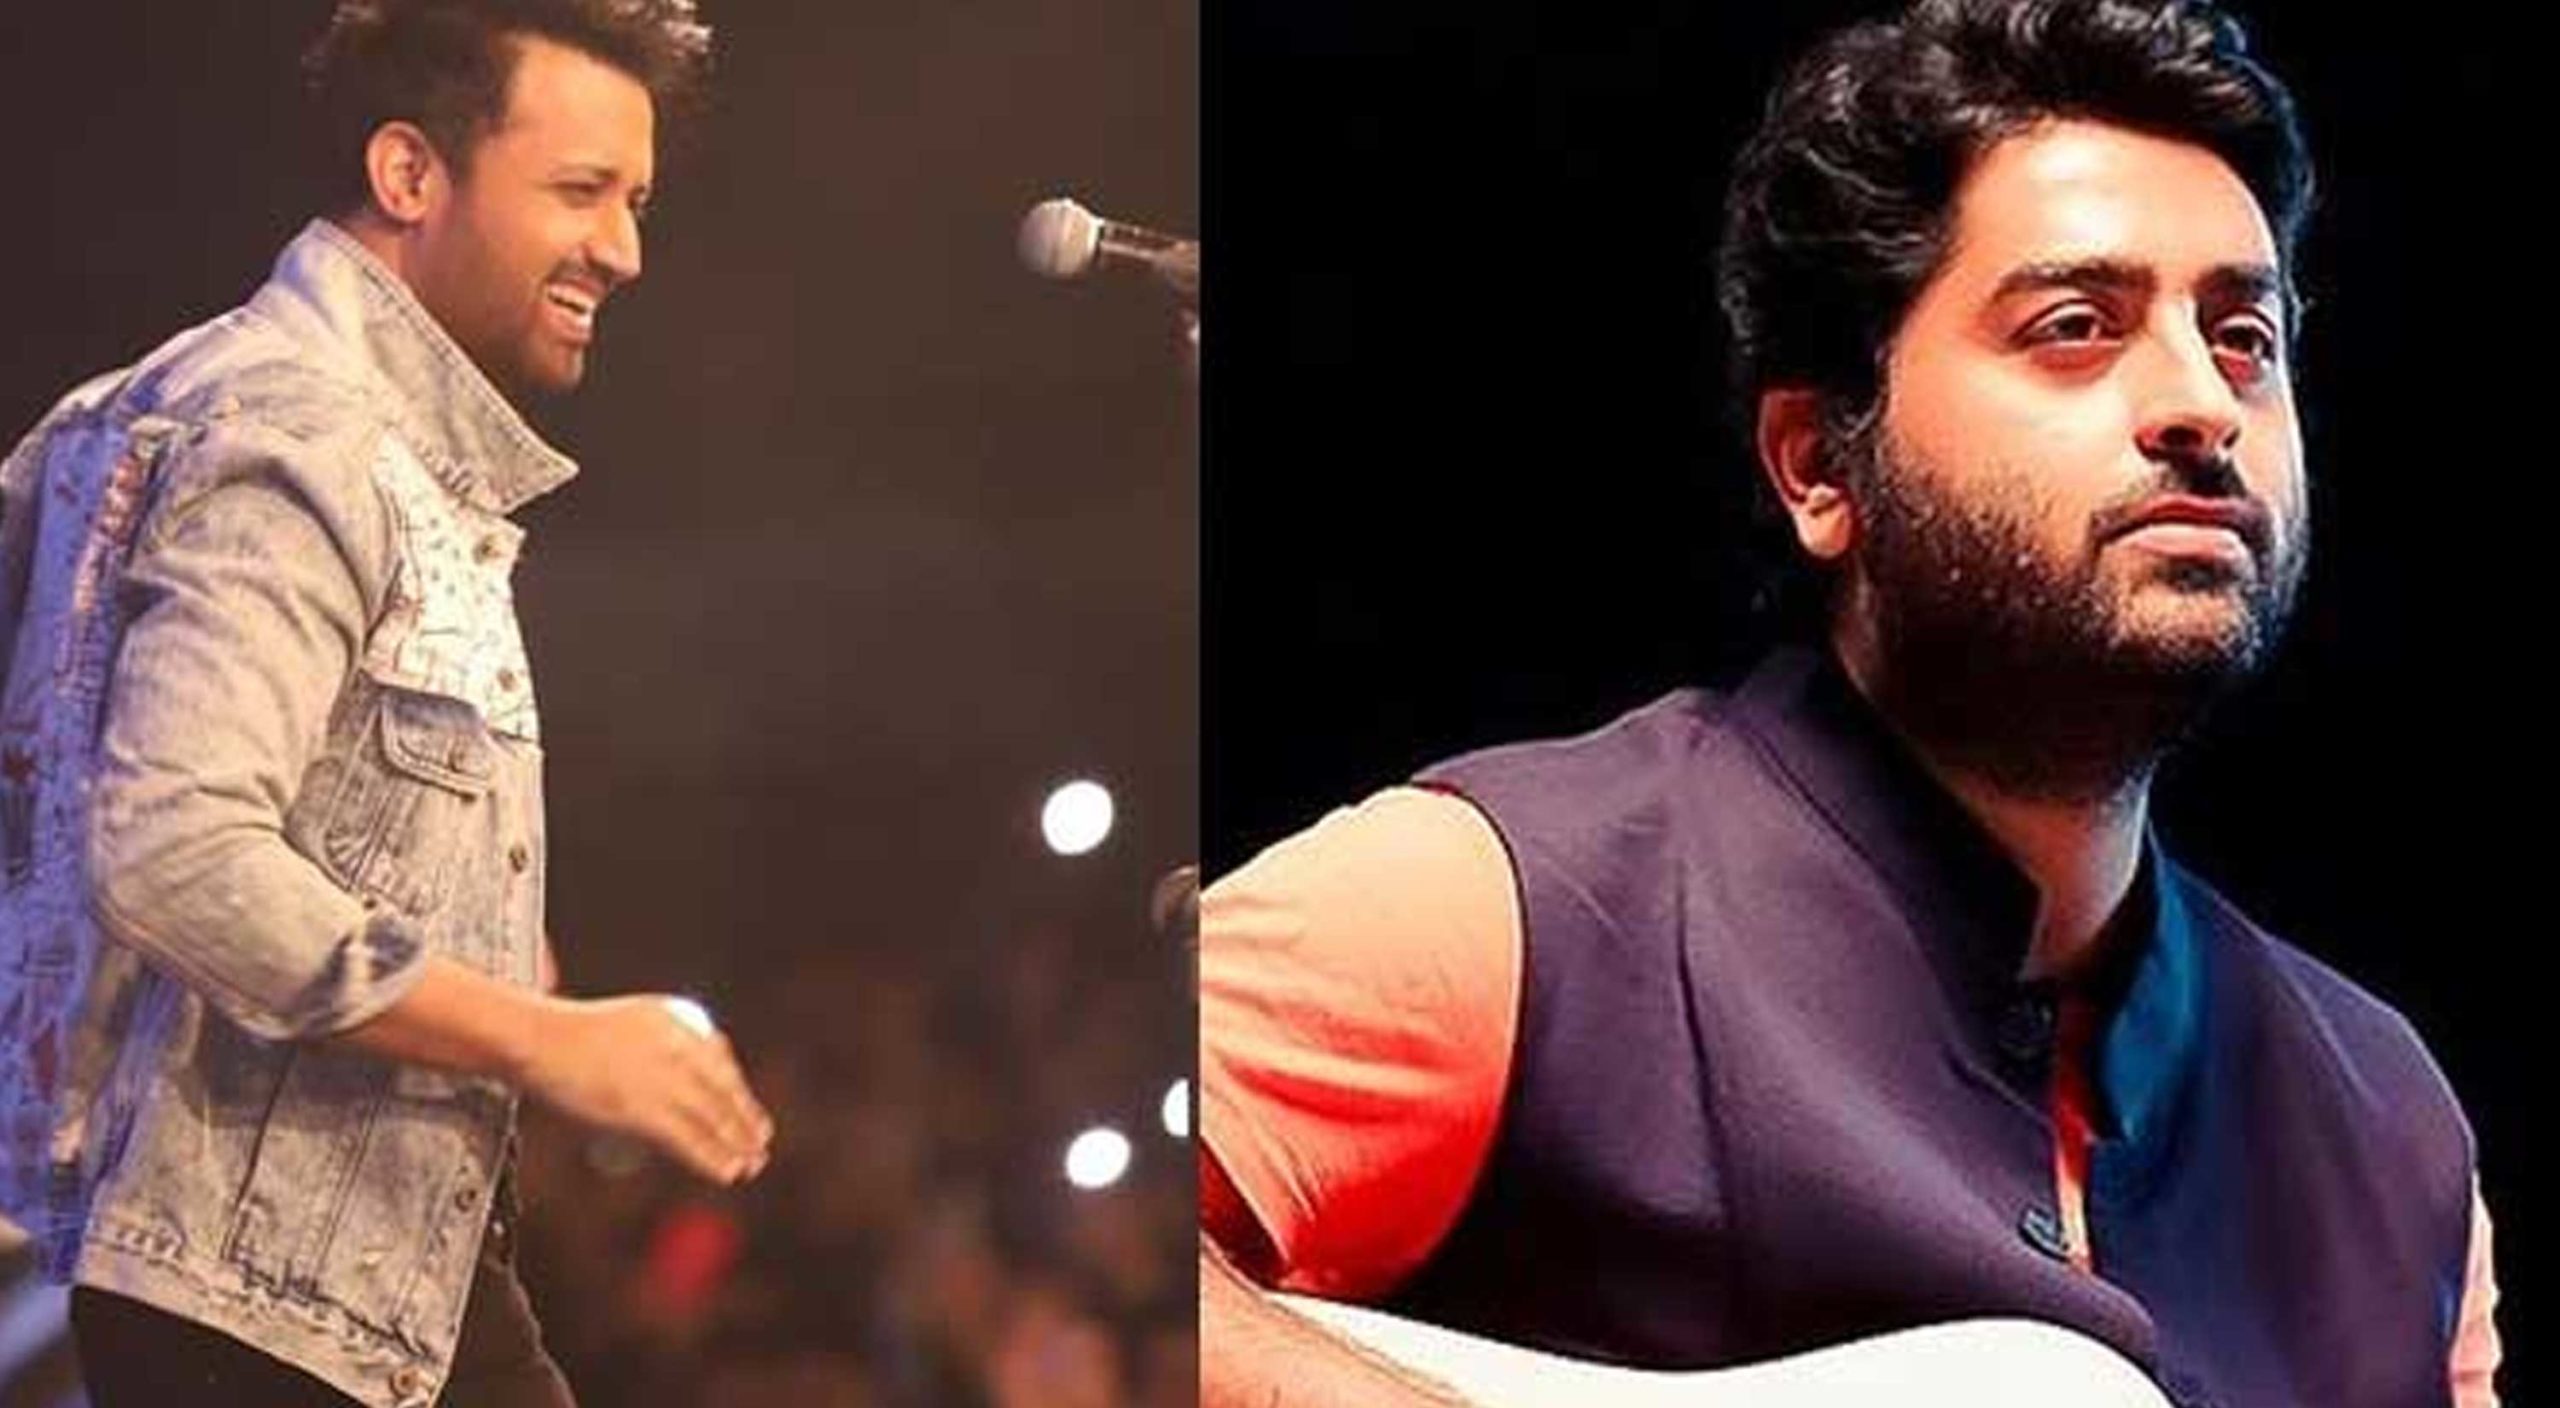 atif-aslam-wants-to-perform-with-arijit-singh-in-pakistan-s-northern-areas